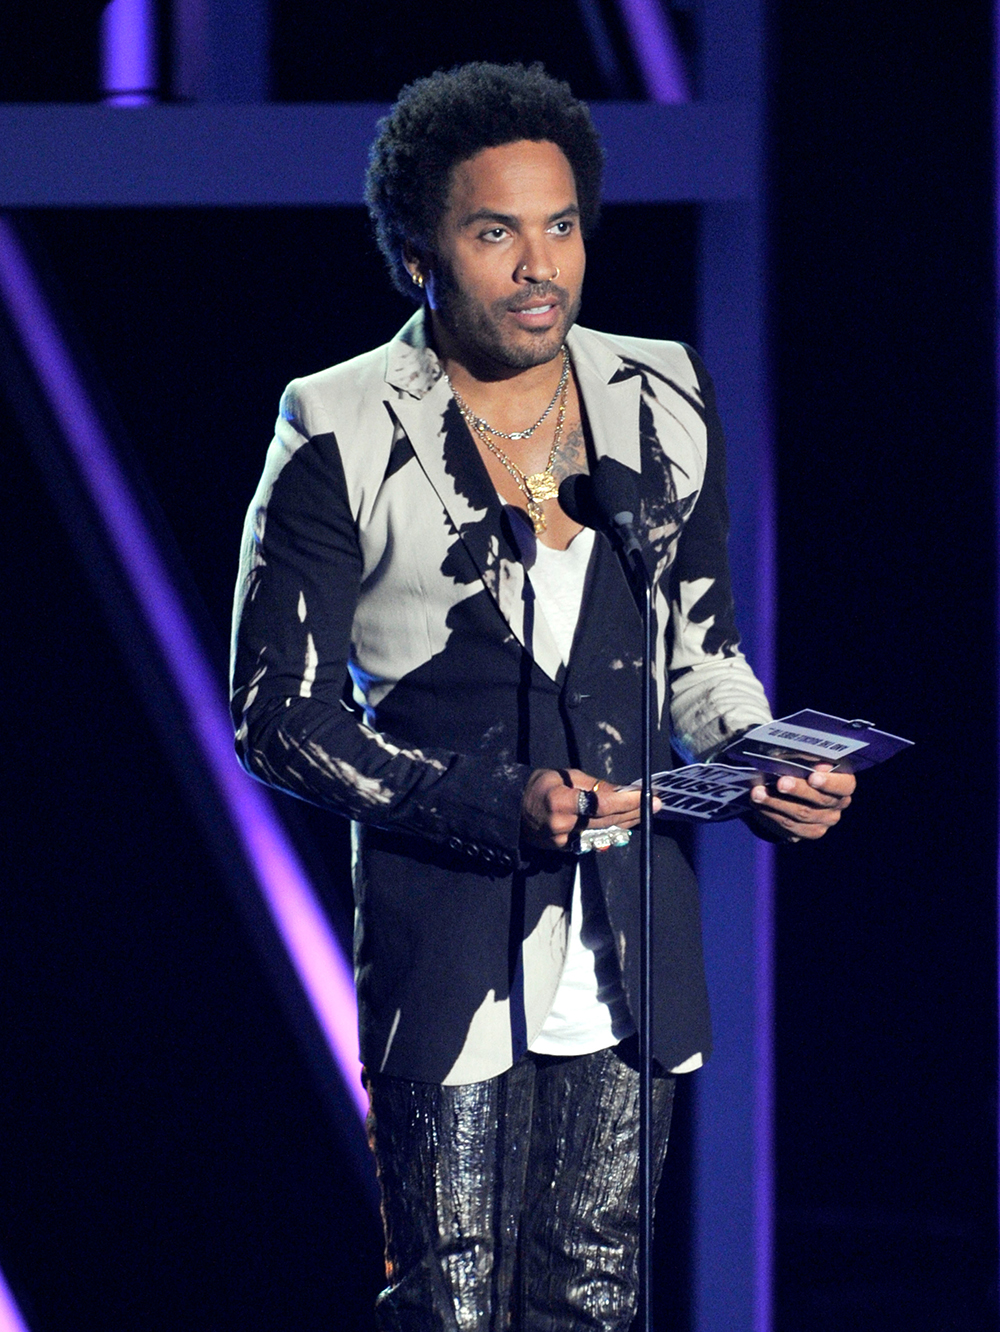 <p>Lenny Kravitz presents the award for female video of the year at the 2013 CMT Music Awards at Bridgestone Arena, in Nashville, Tenn. He wore a black and white jacket with shiny pants.</p>